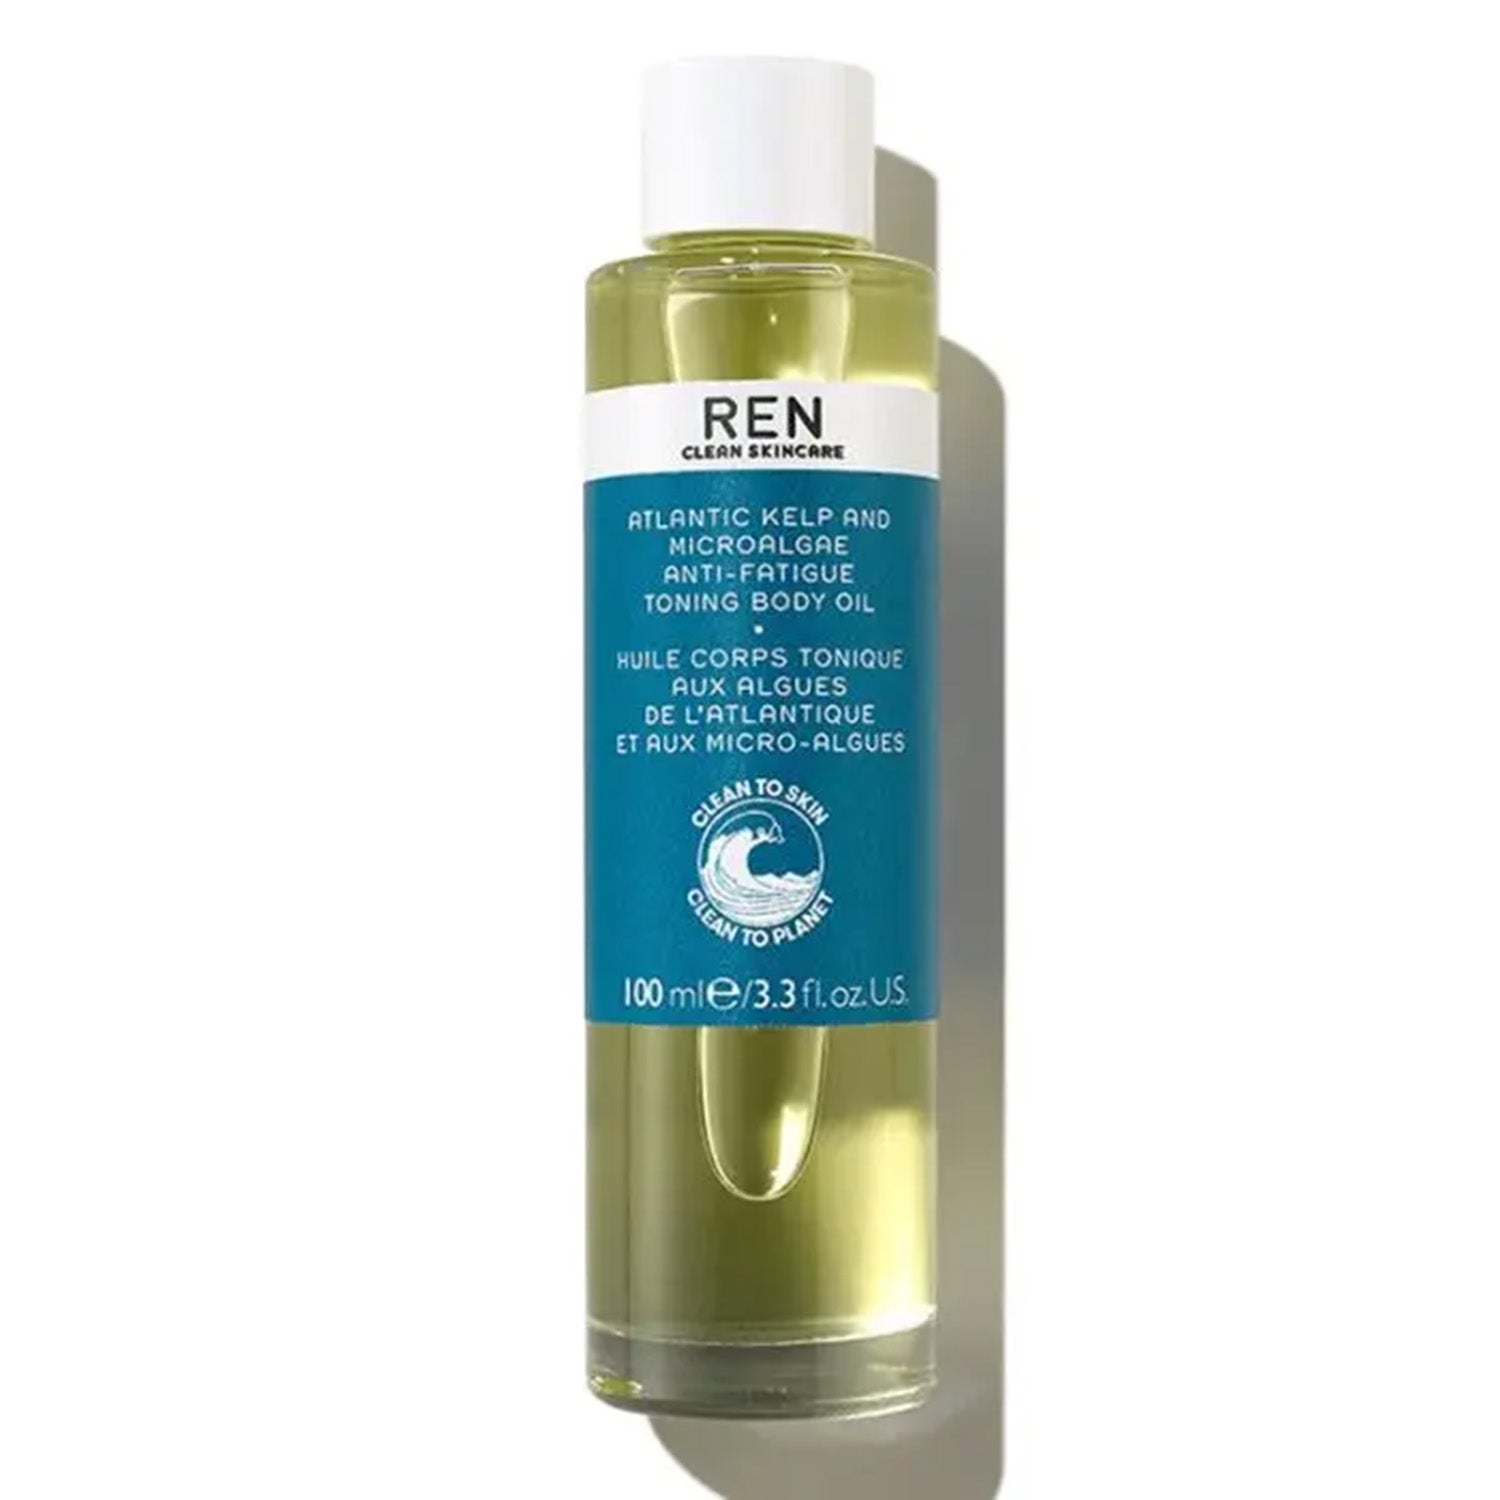 Atlantic Kelp And Microalgae Anti-Fatigue Toning Body Oil by REN Skincare is hydrating body oil to tone and nourish skin